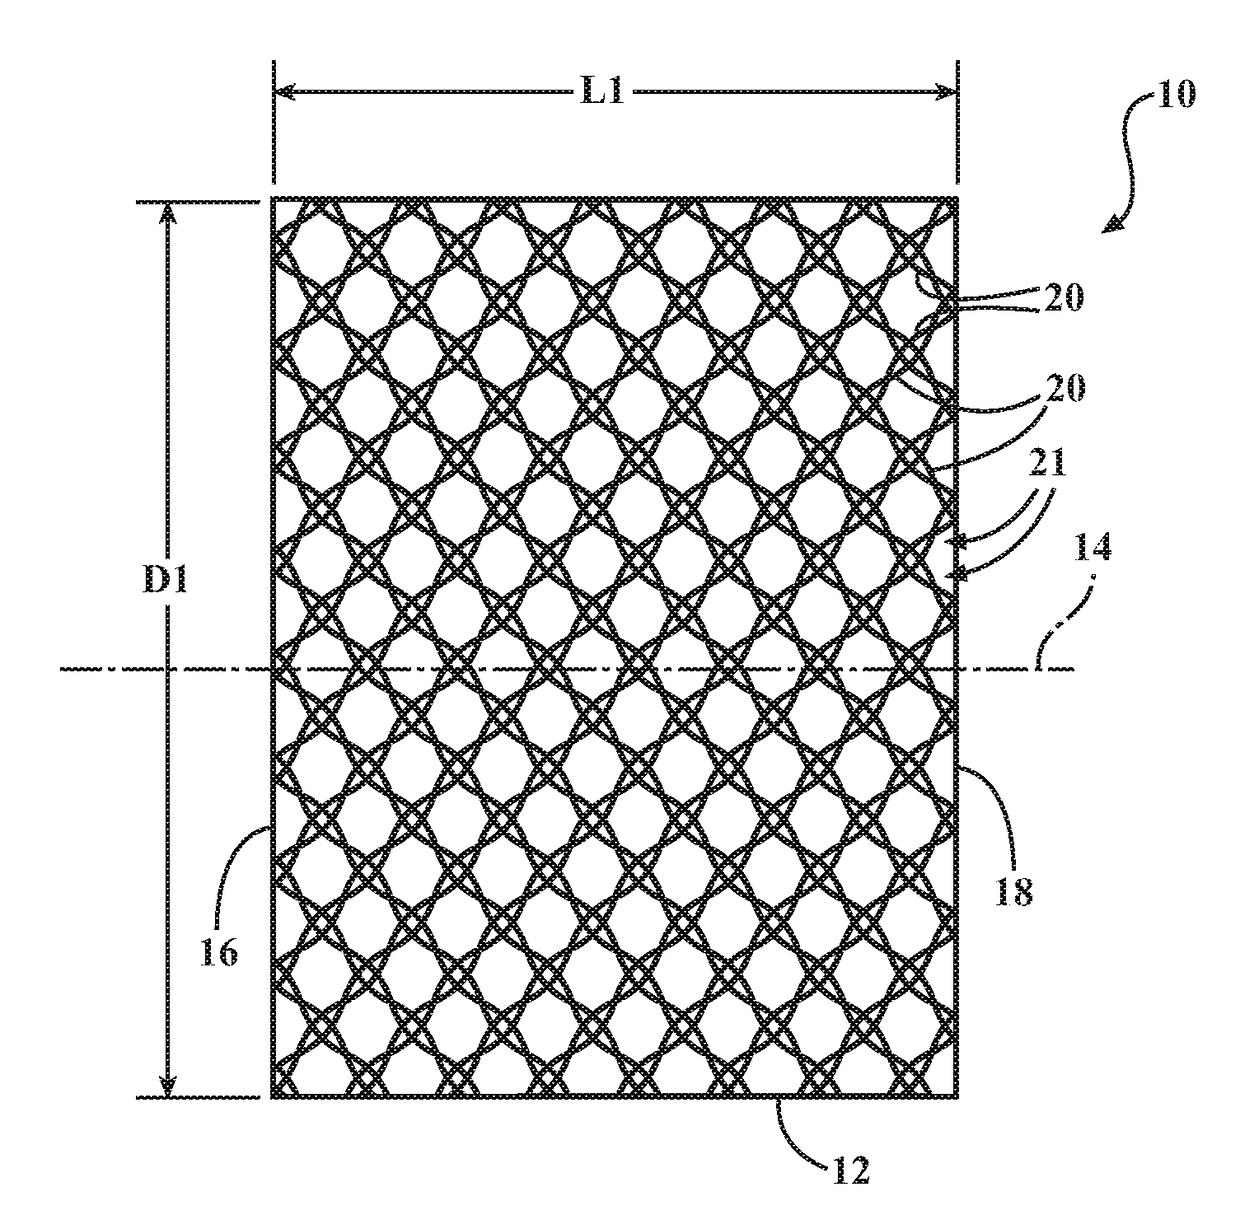 Braided textile sleeve with self-sustaining expanded and contracted states and enhanced "as supplied" bulk configuration and methods of construction and supplying bulk lengths thereof